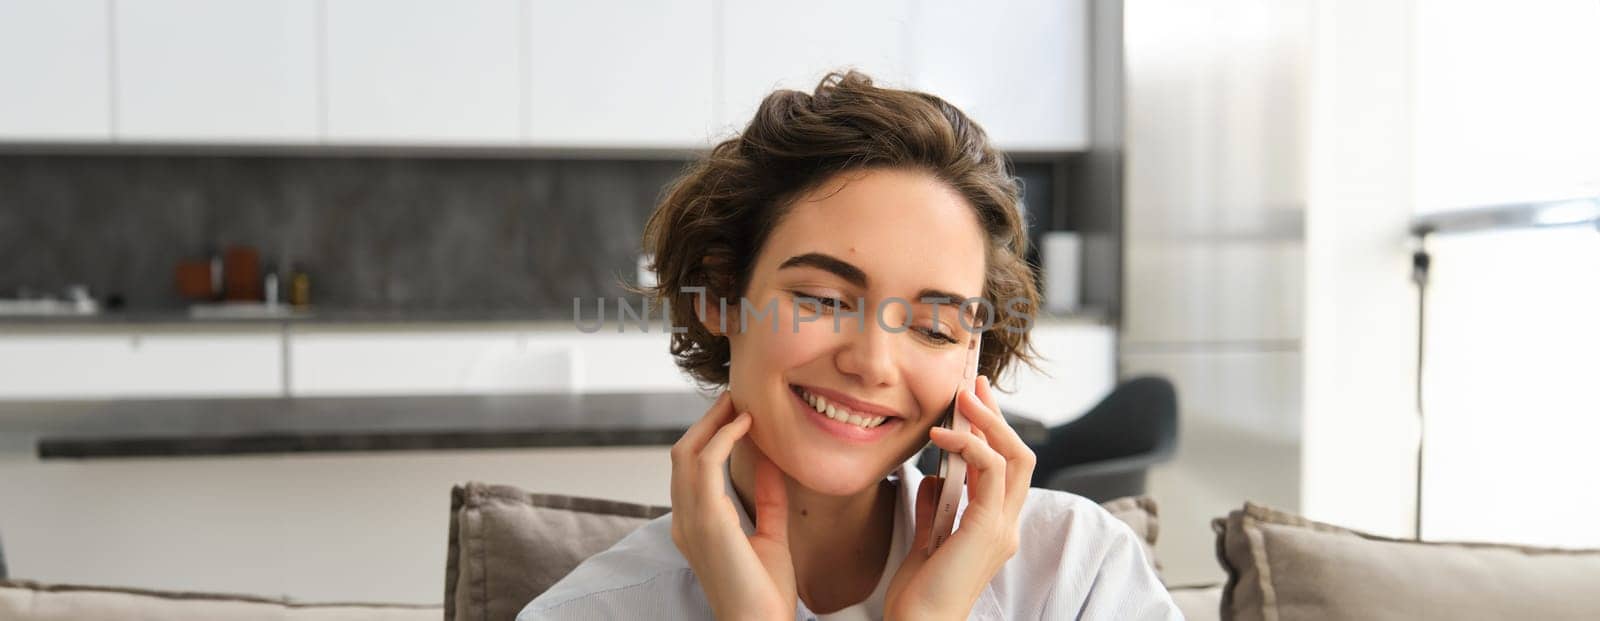 Close up portrait of happy brunette girl, talks on mobile phone, chats on smartphone, calls someone while spending time at home on sofa.